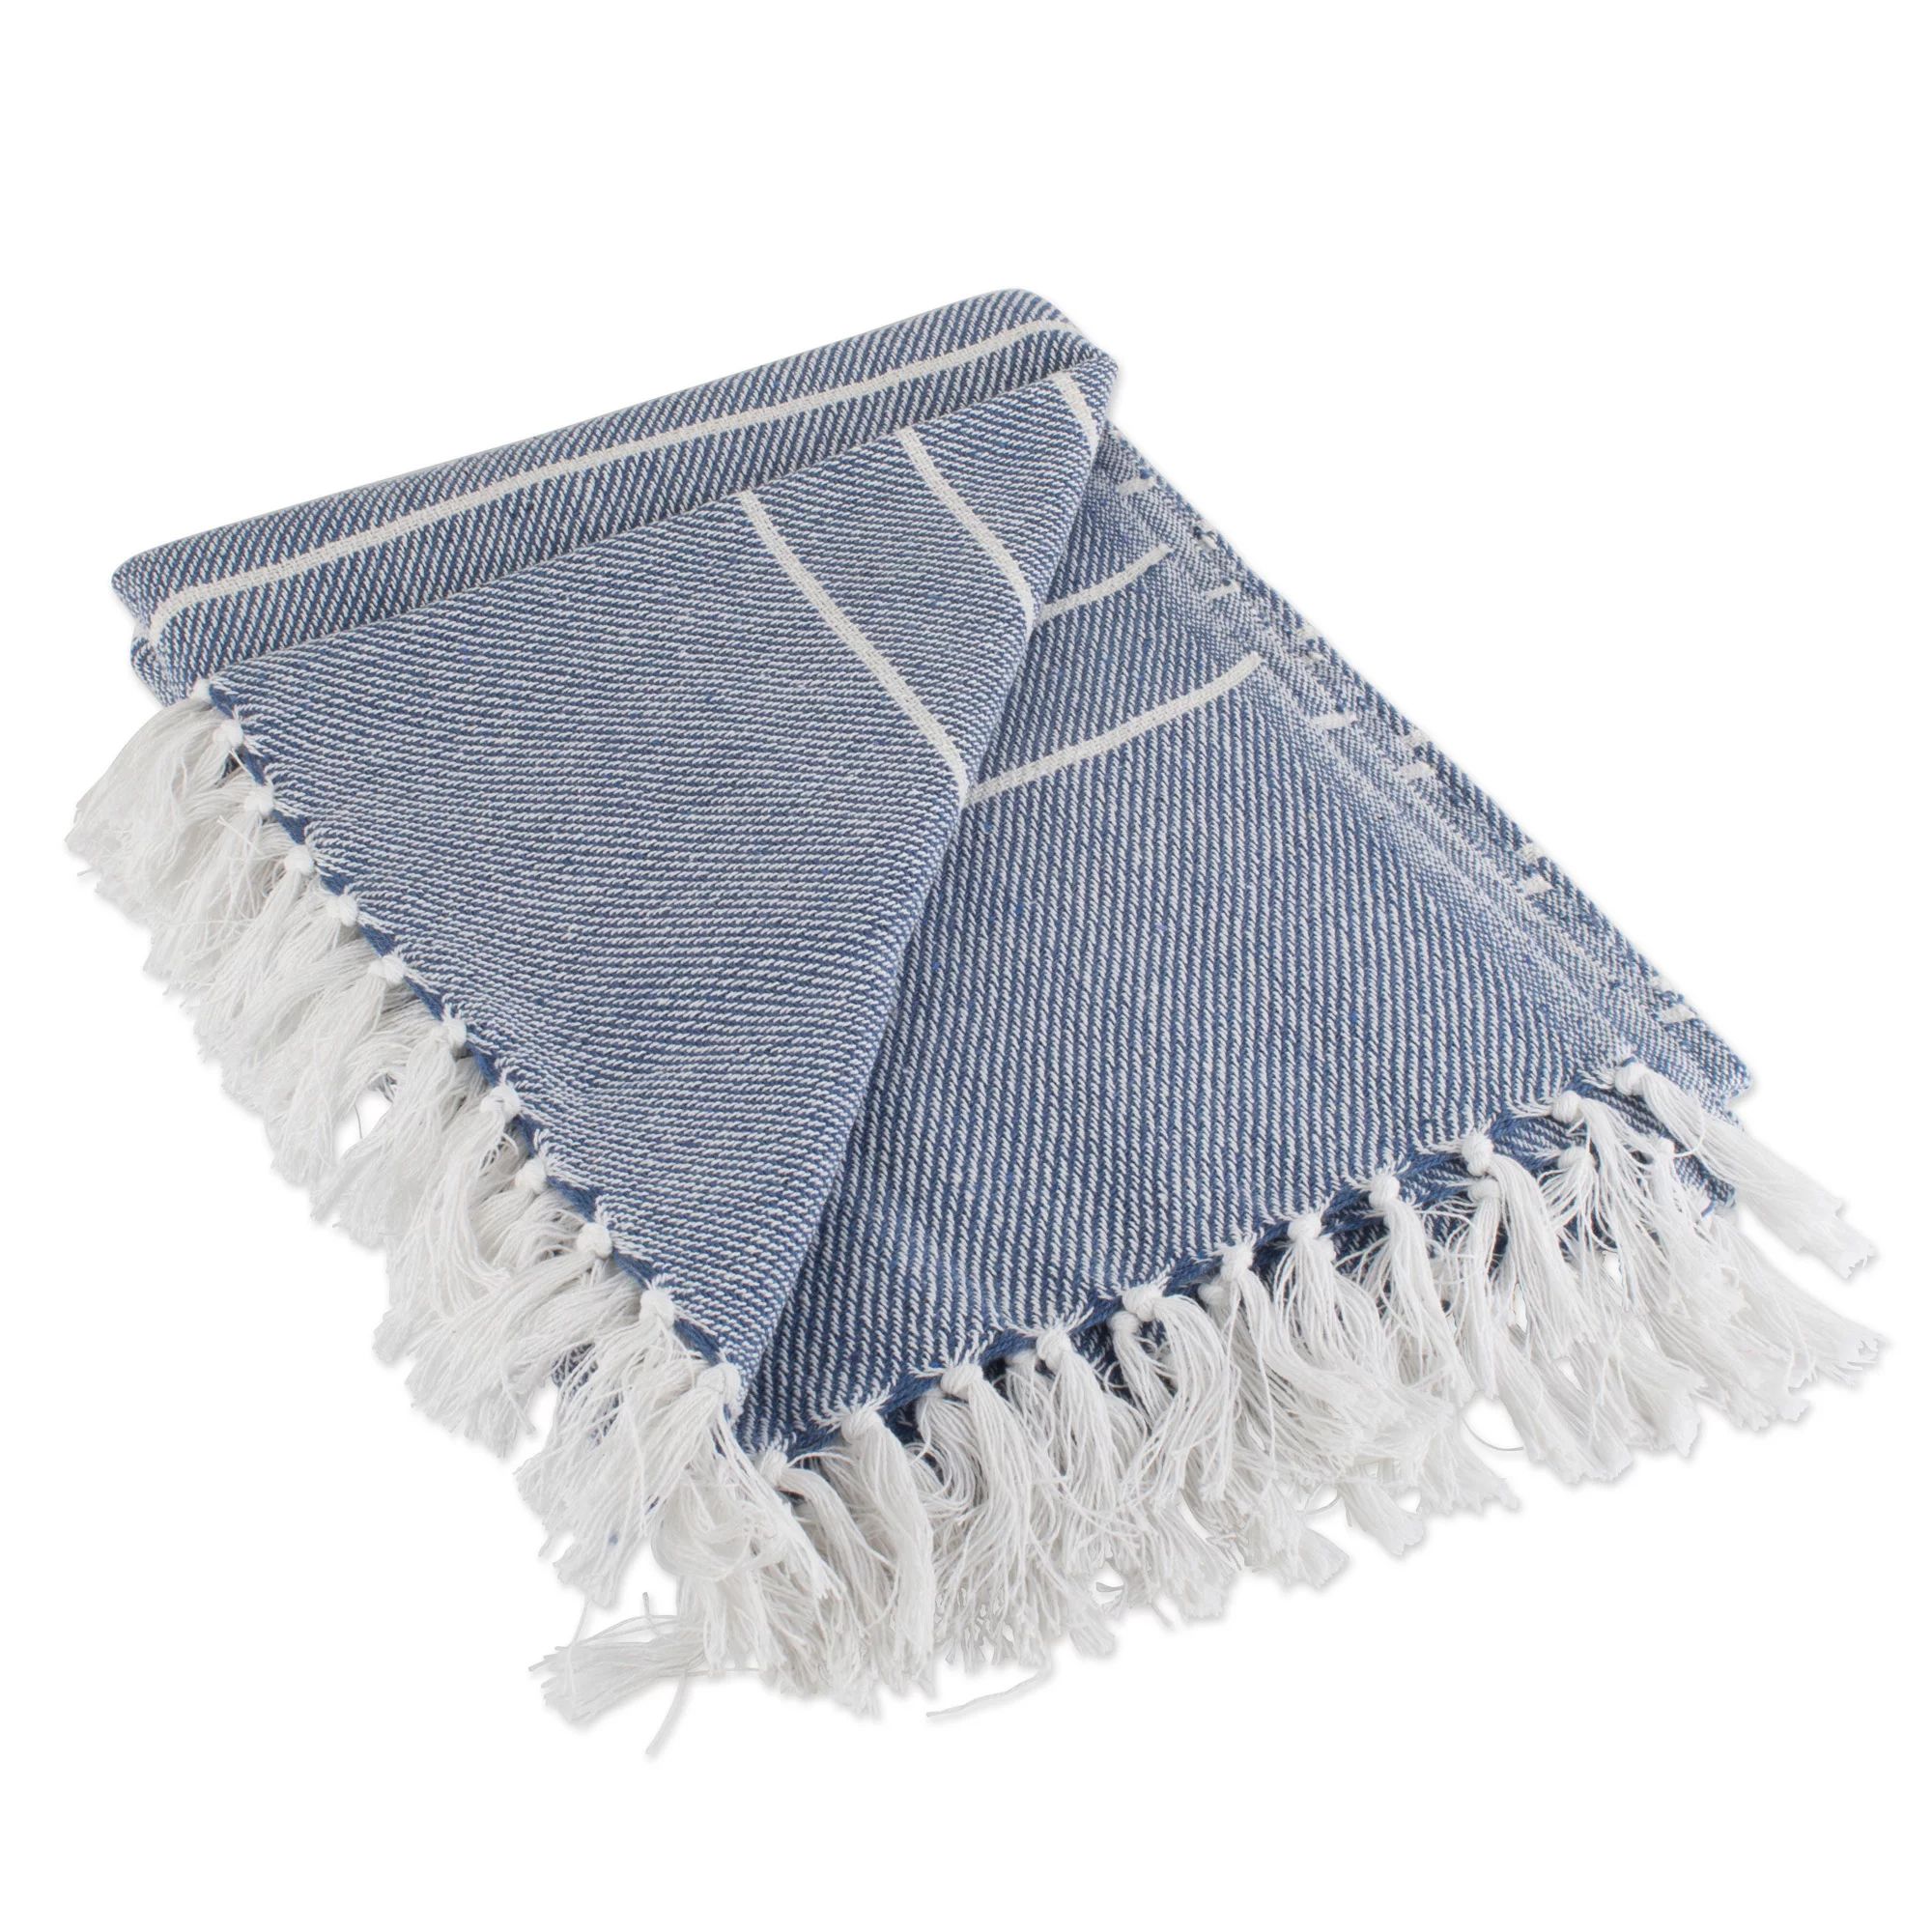 Contemporary Home Living Blue and White Striped Knitted Fringed Throw Blanket 50" x 60" | Walmart (US)